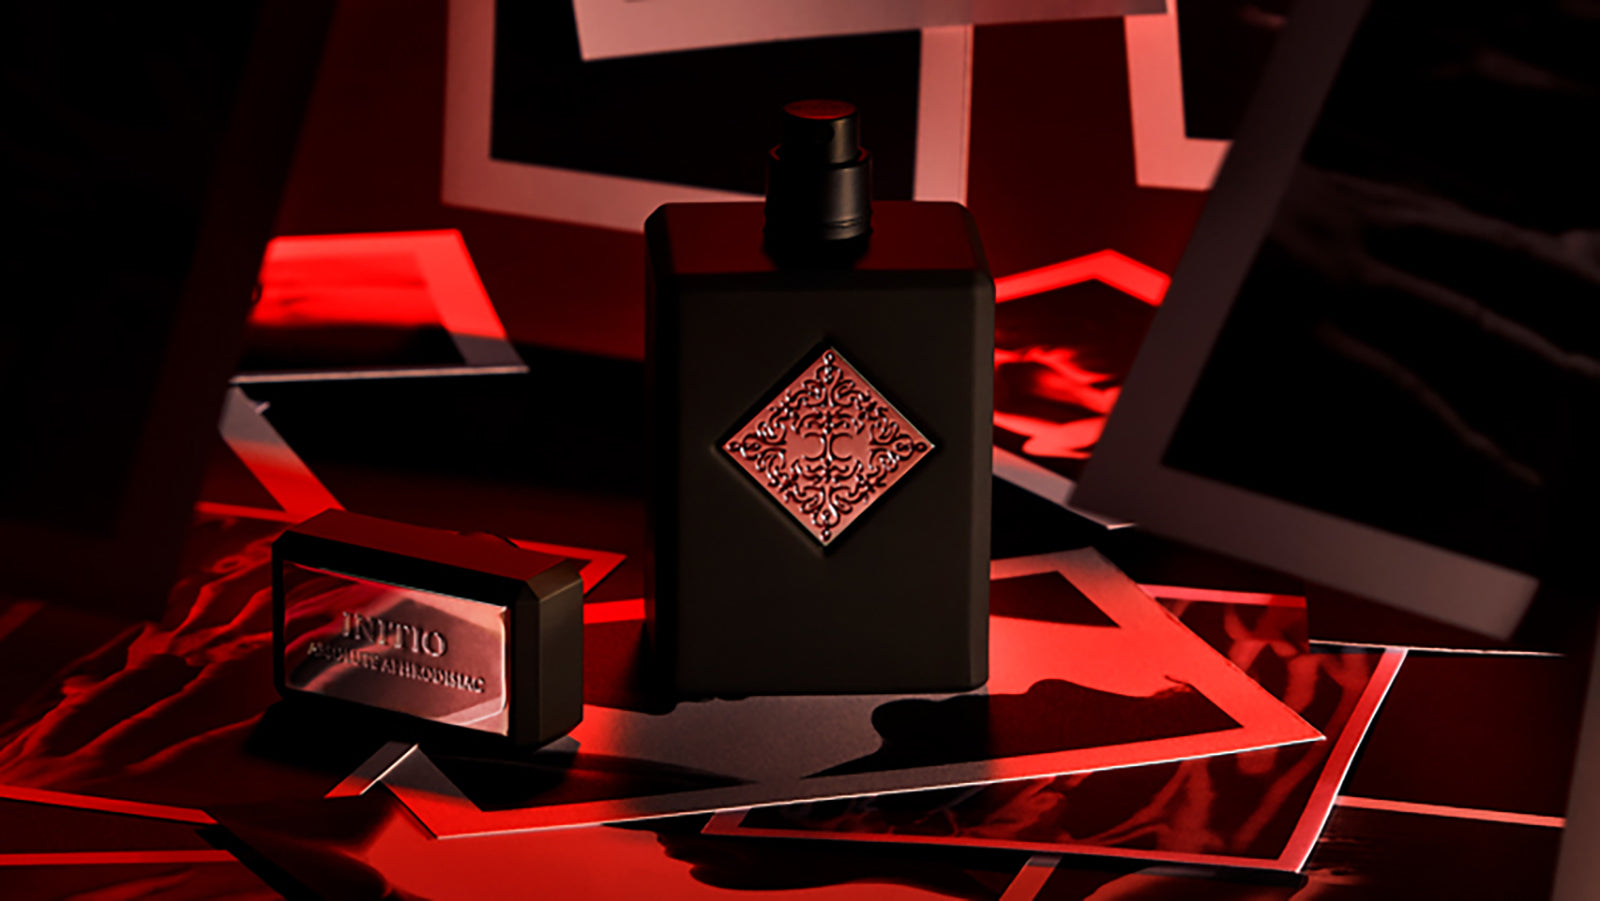 Initio Parfums Prives